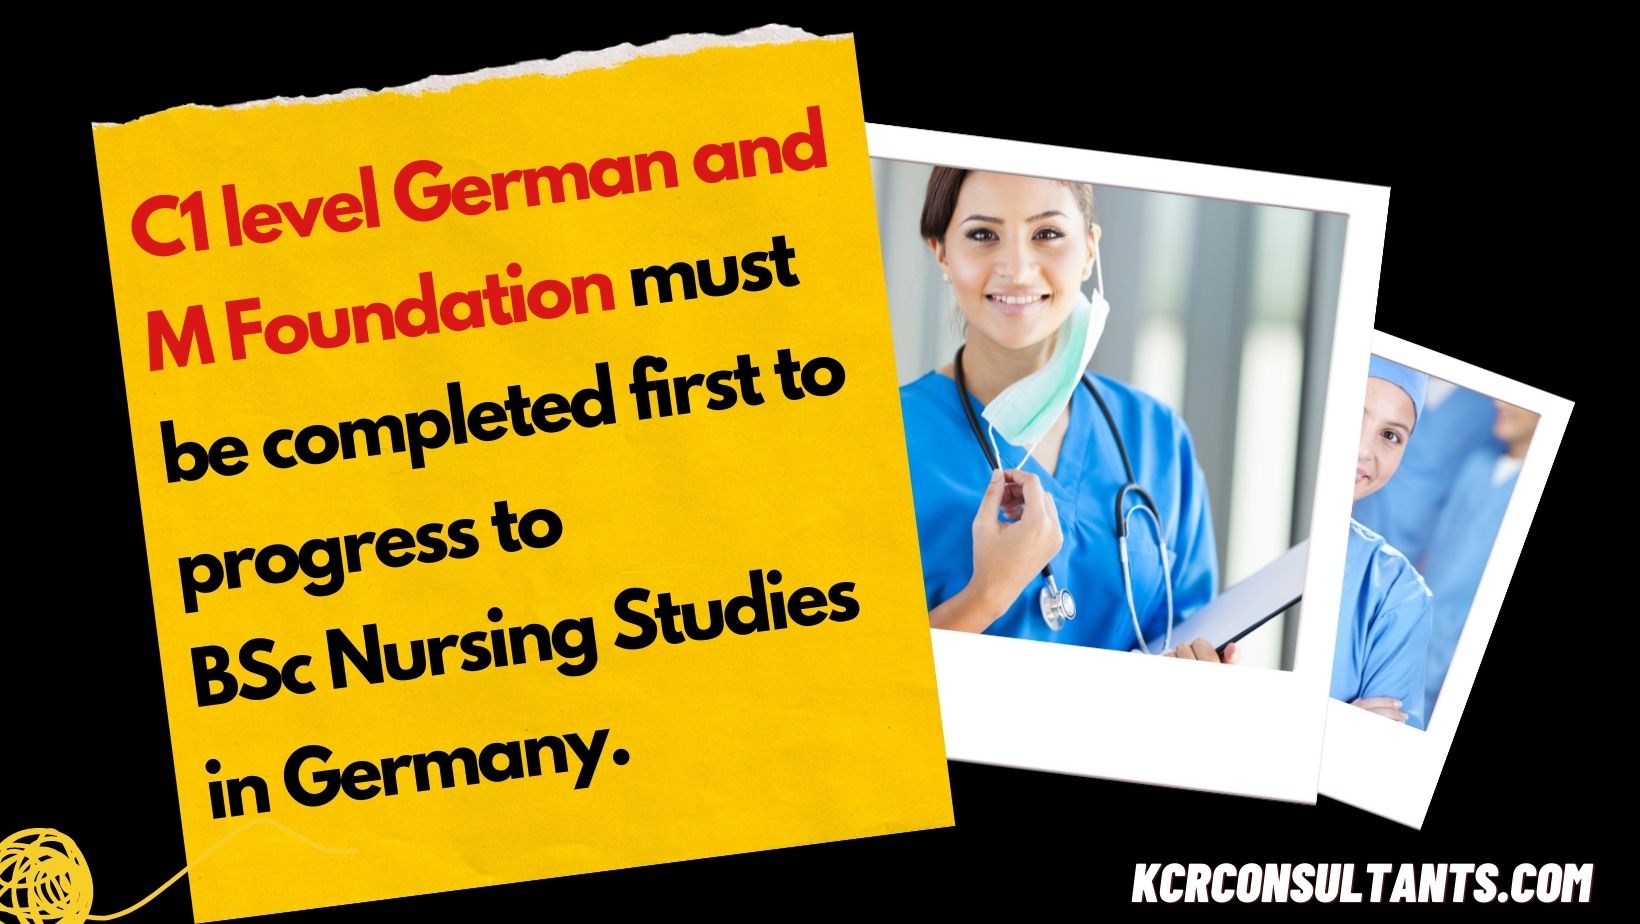 Studying nursing in Germany and the Ausbildung Nursing intakes